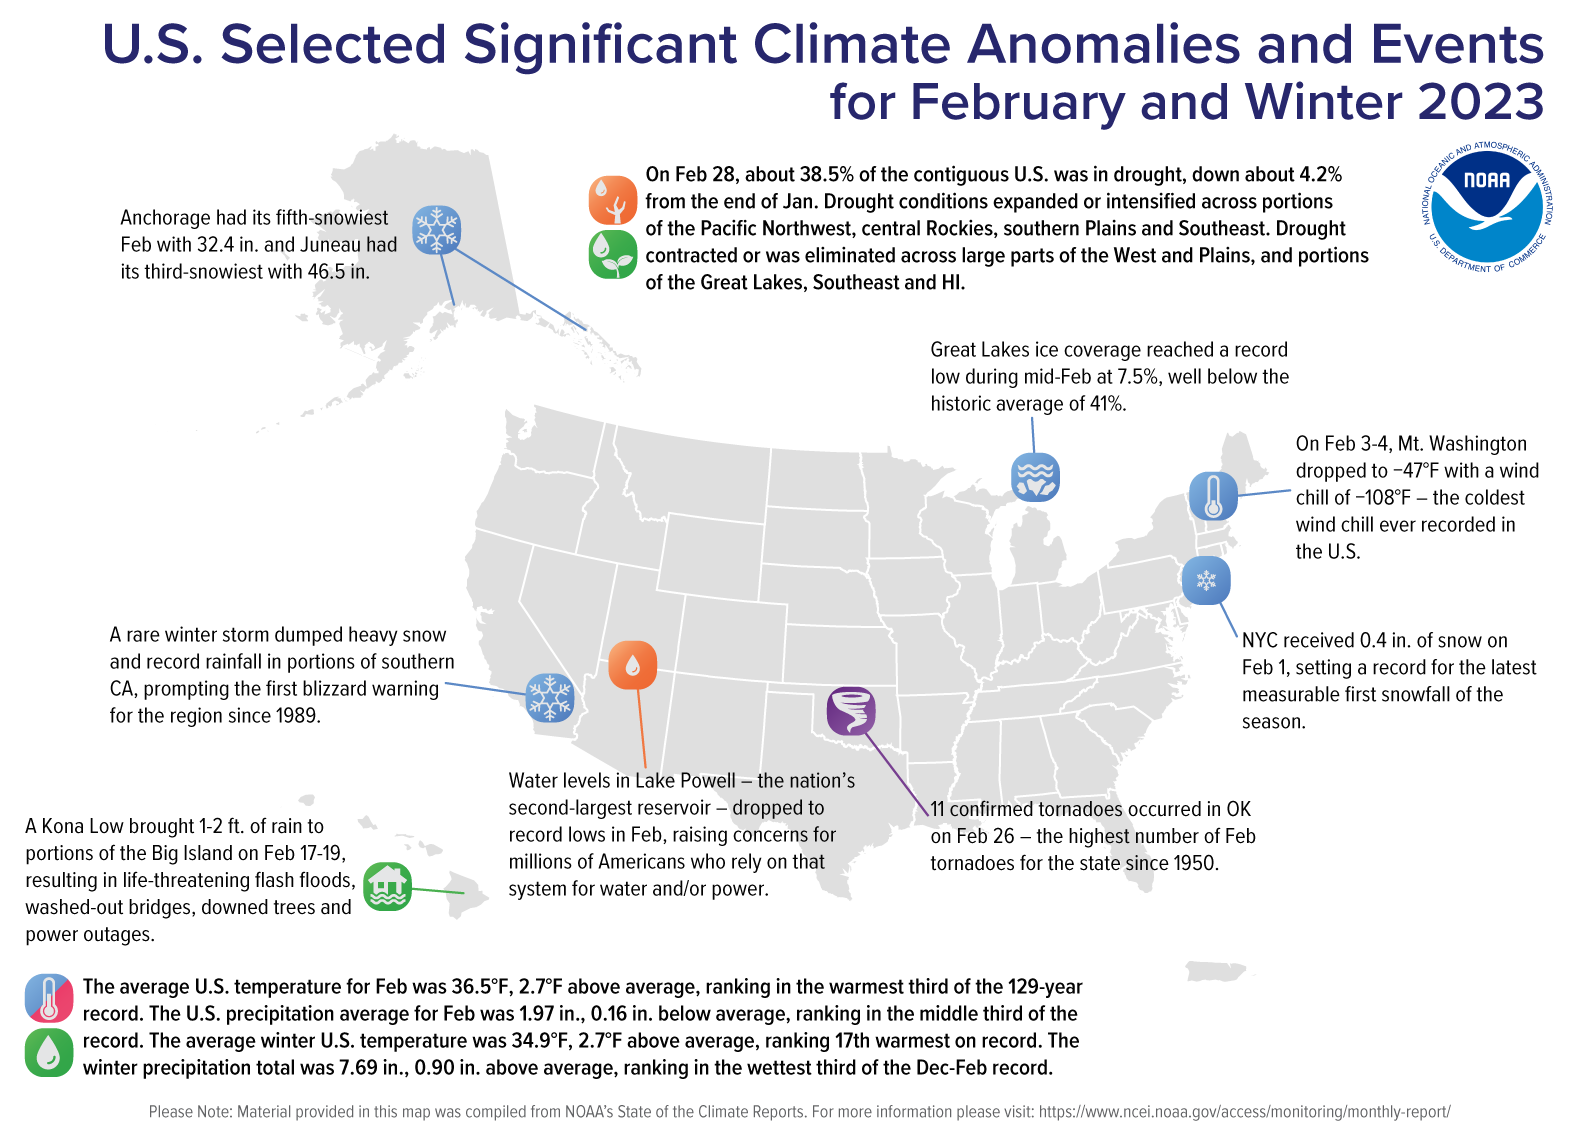 A map of the U.S. plotted with some of the most significant climate events that occurred during February 2023.